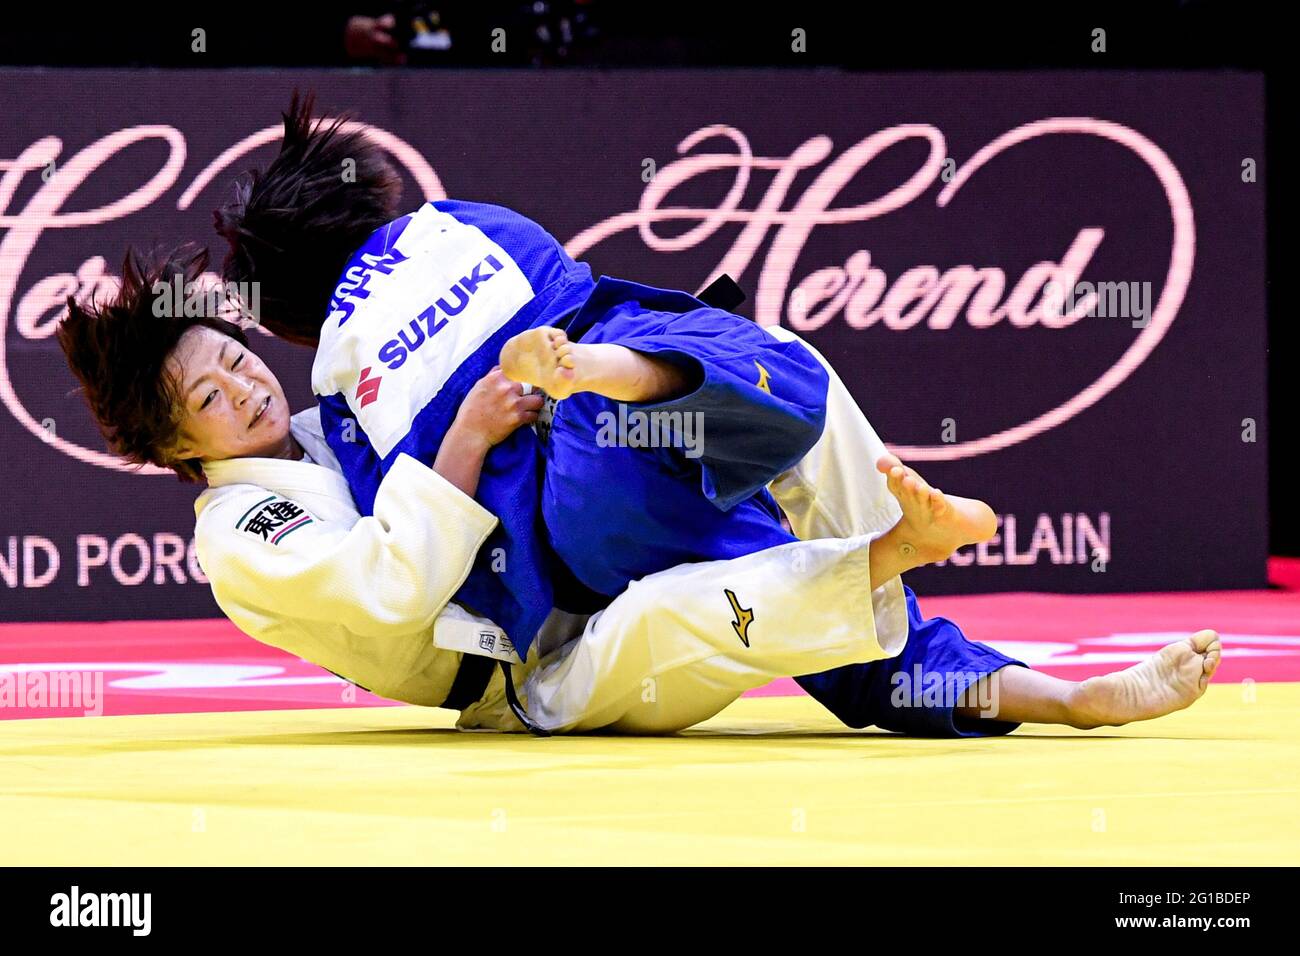 BUDAPEST, HUNGARY - JUNE 6: Natsumi Tsunoda of Japan, Wakan Koga of Japan during the World Judo Championships Hungary 2021 at Papp Laszlo Budapest Sports Arena on June 6, 2021 in Budapest, Hungary (Photo by Yannick Verhoeven/Orange Pictures) Stock Photo